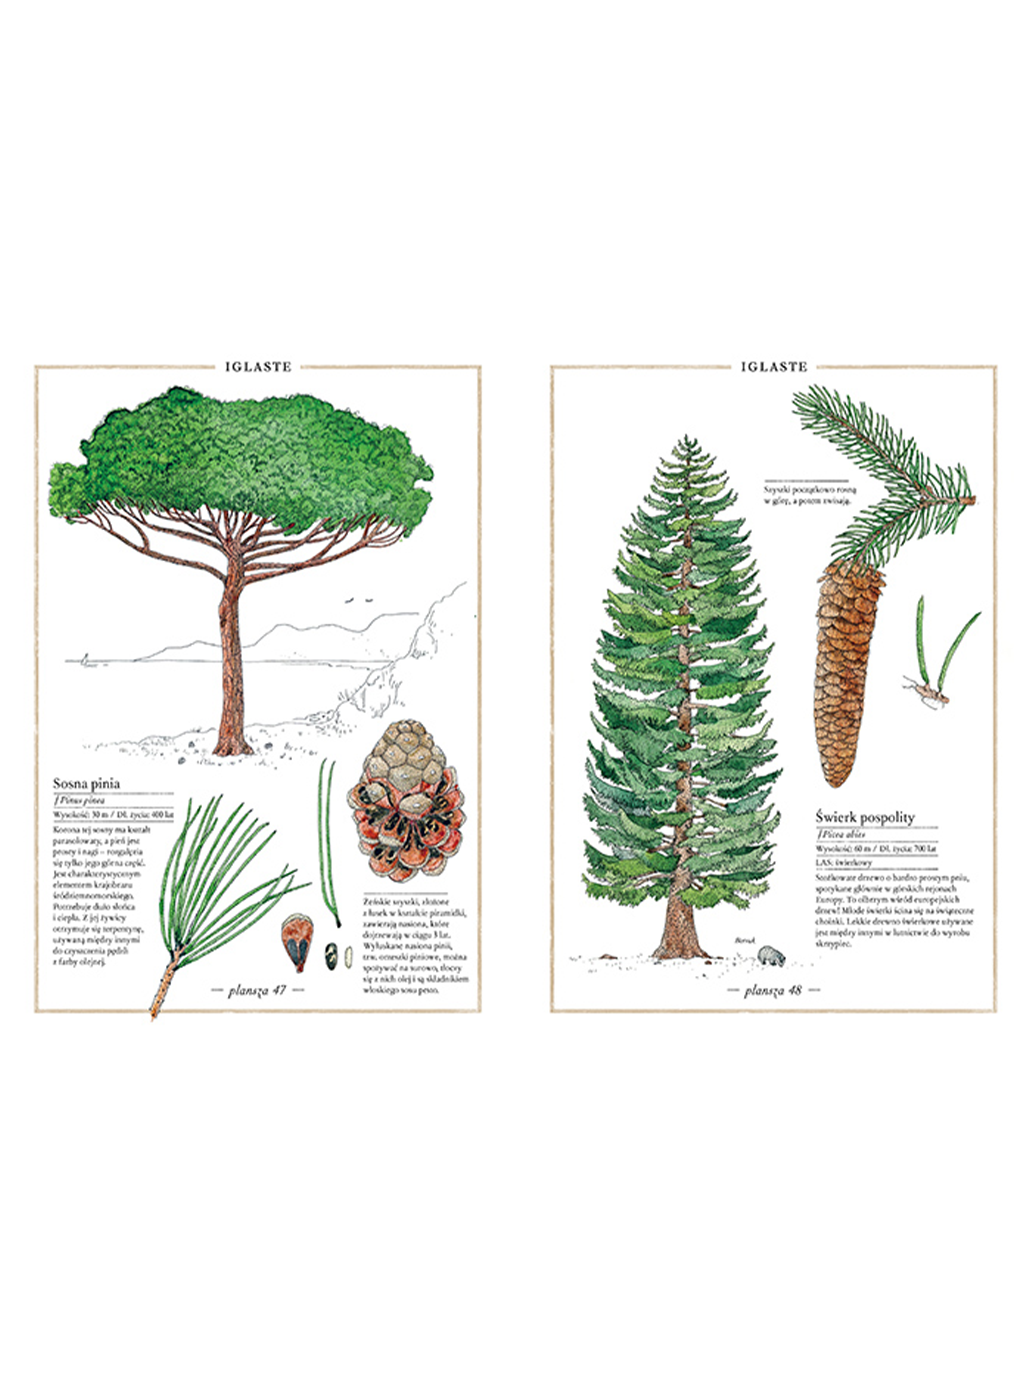 Illustrated inventory of trees